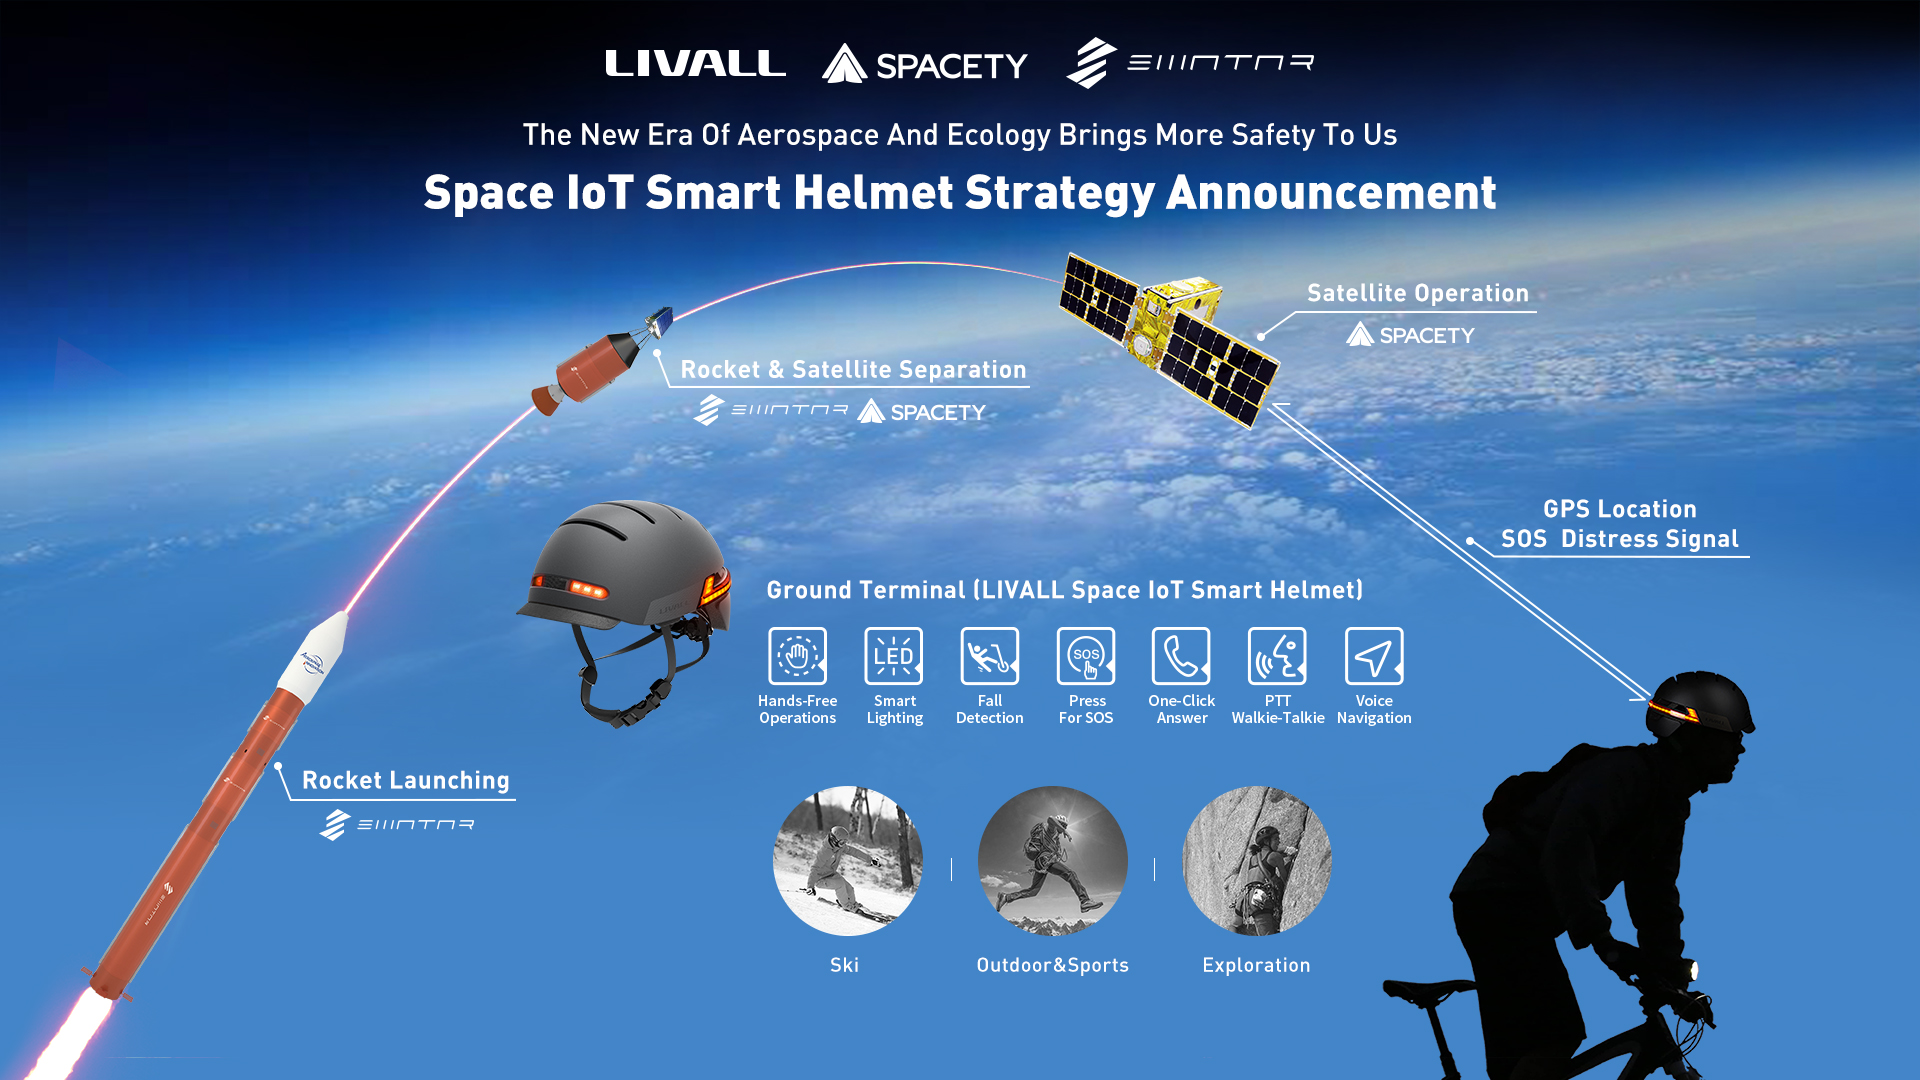 Smart Helmet Brand LIVALL Announces Cooperation With Space I'